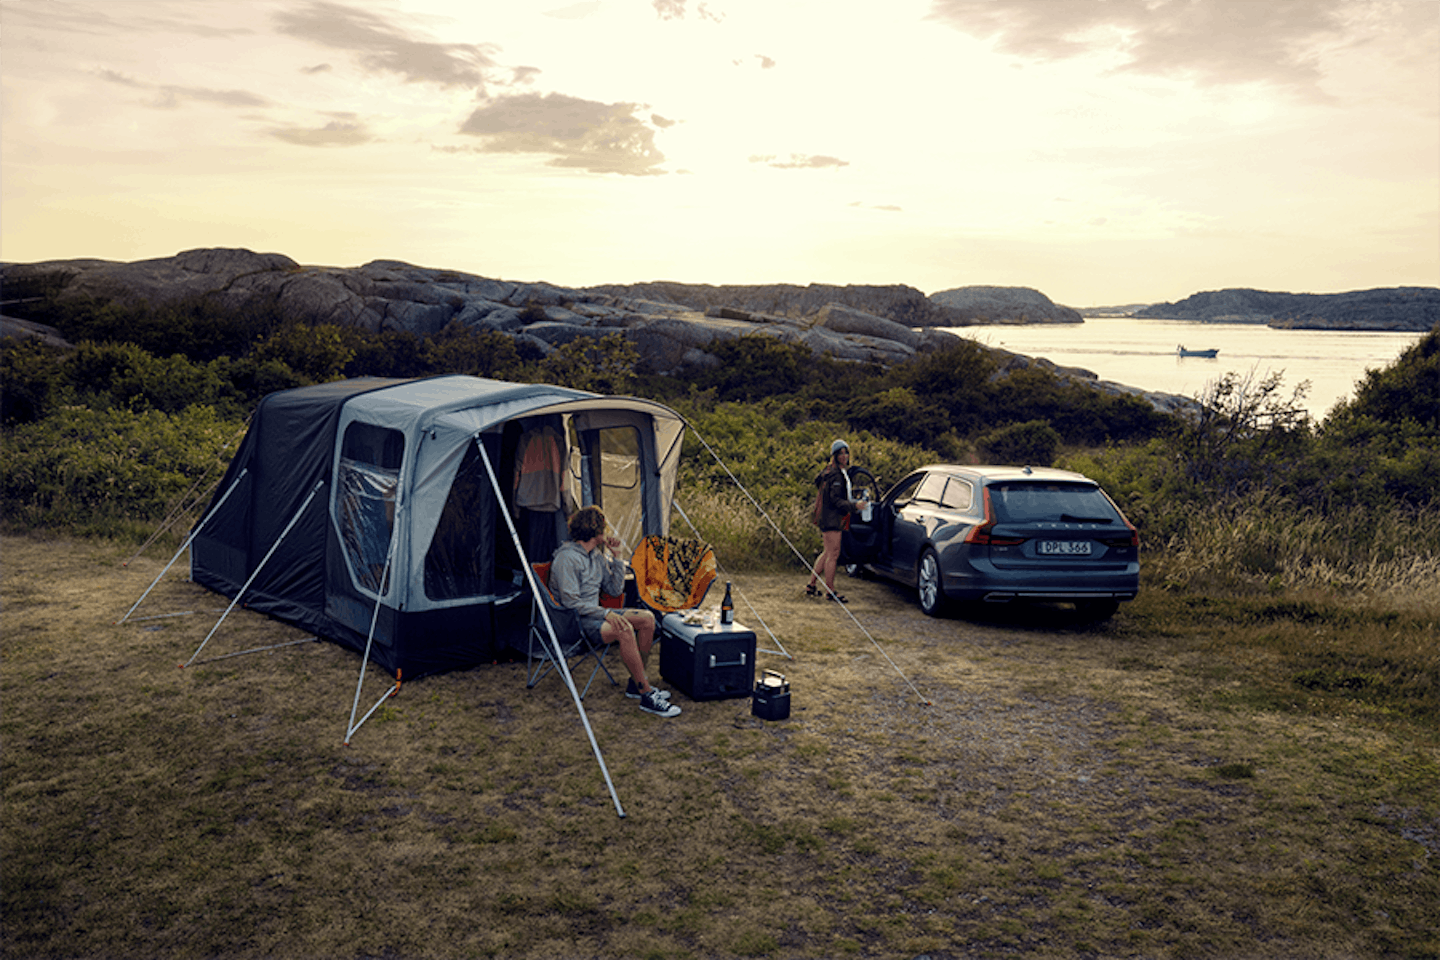 tent and car camping near a lake or by the sea